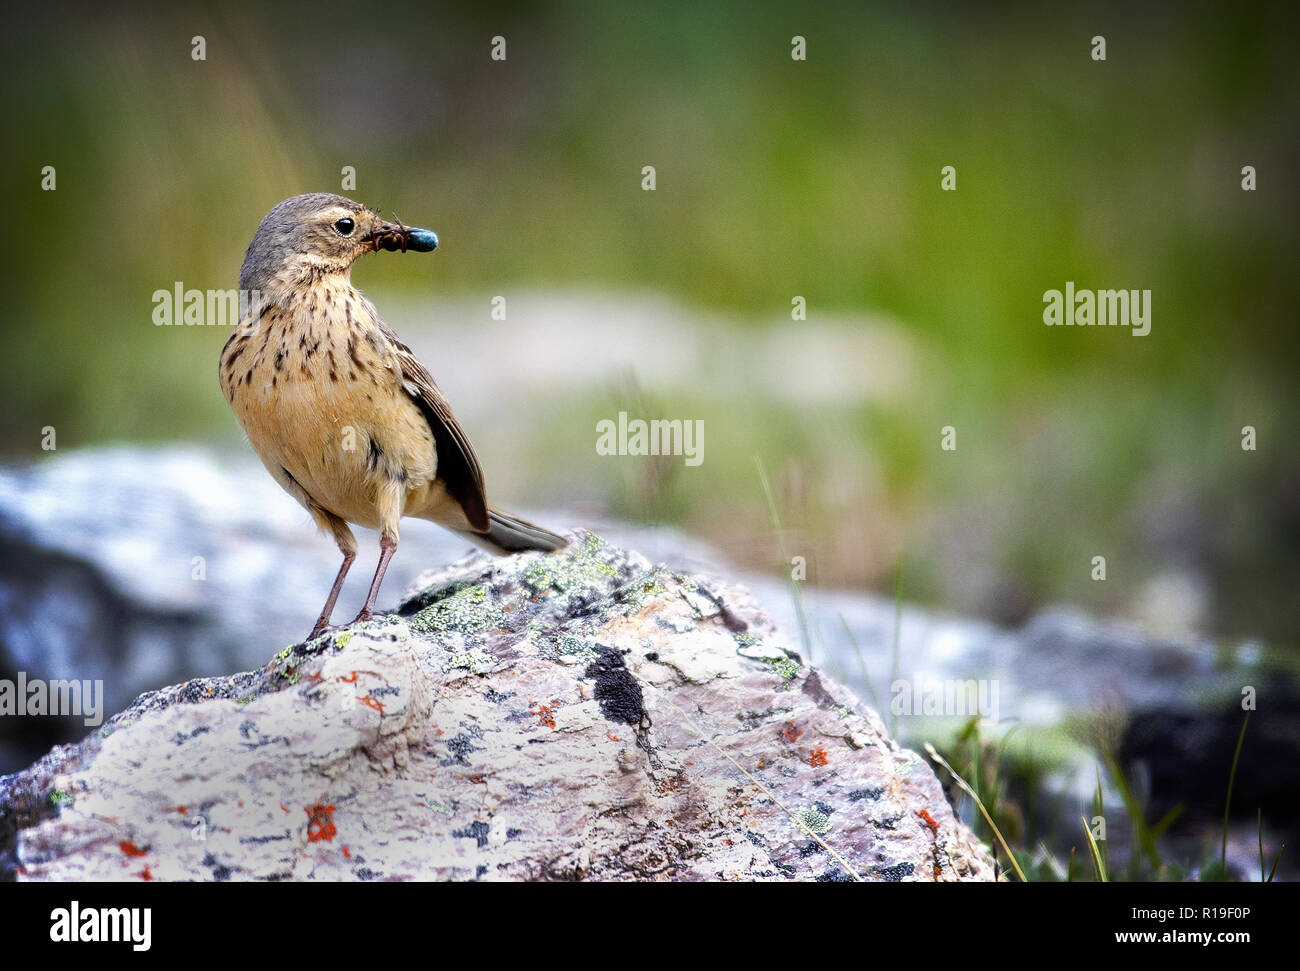 The buff-bellied pipit (Anthus rubescens), or American pipit as it is known in North America, is a small songbird Stock Photo